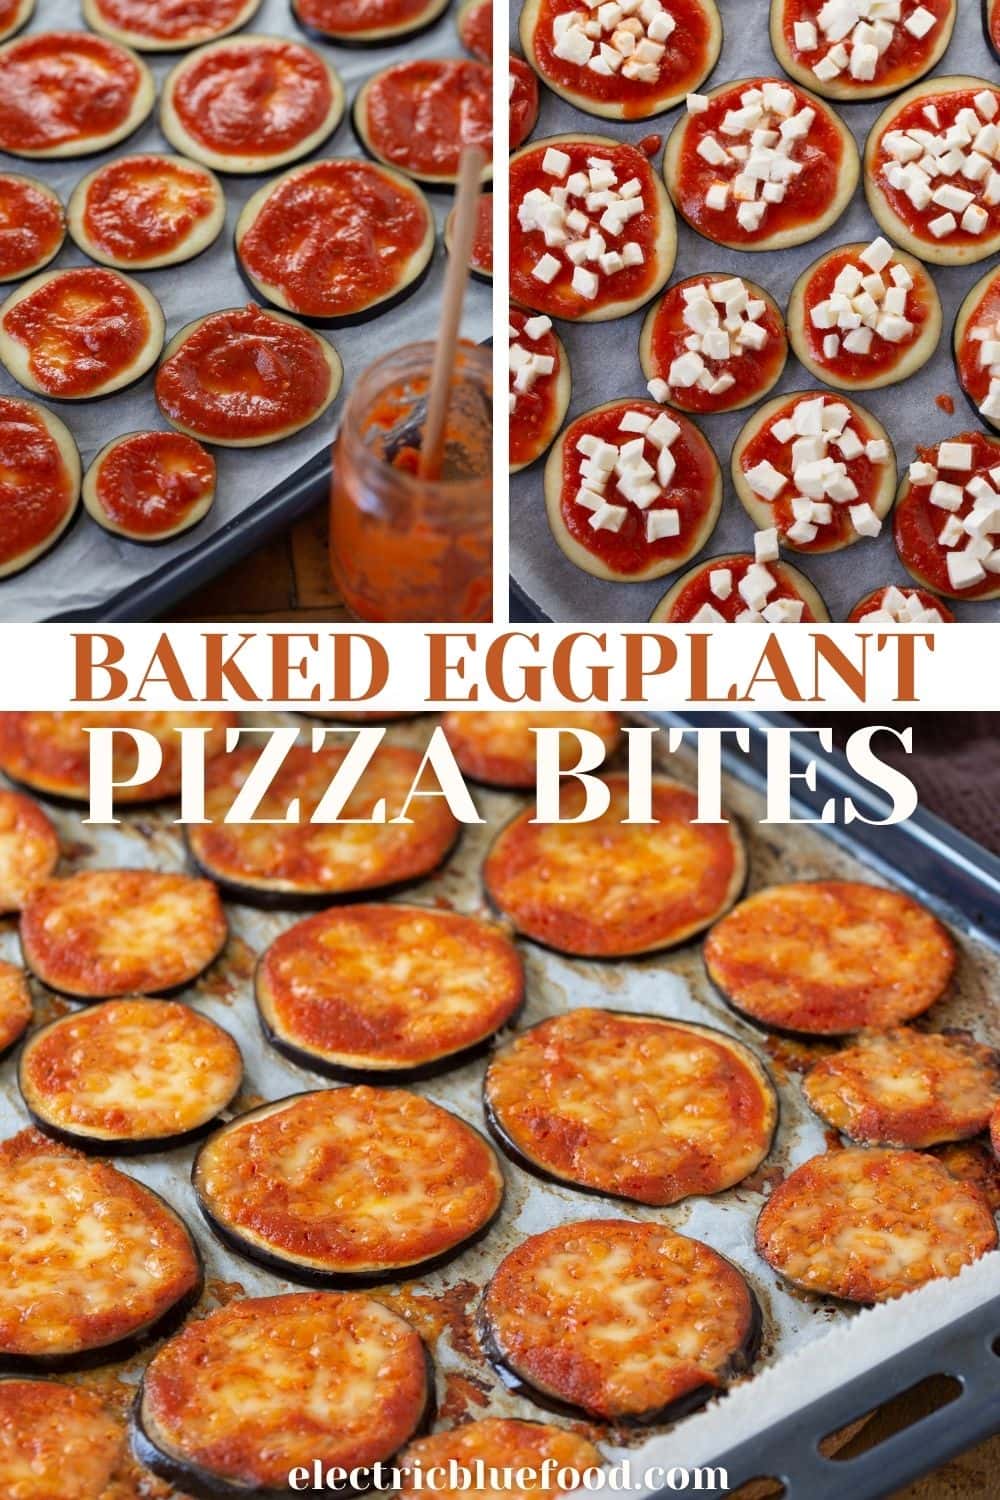 Baked eggplant pizza bites are low-carb pizza on eggplant slices. Topped with homemade tomato sauce and fresh mozzarella, the perfect pizza flavoured snack.